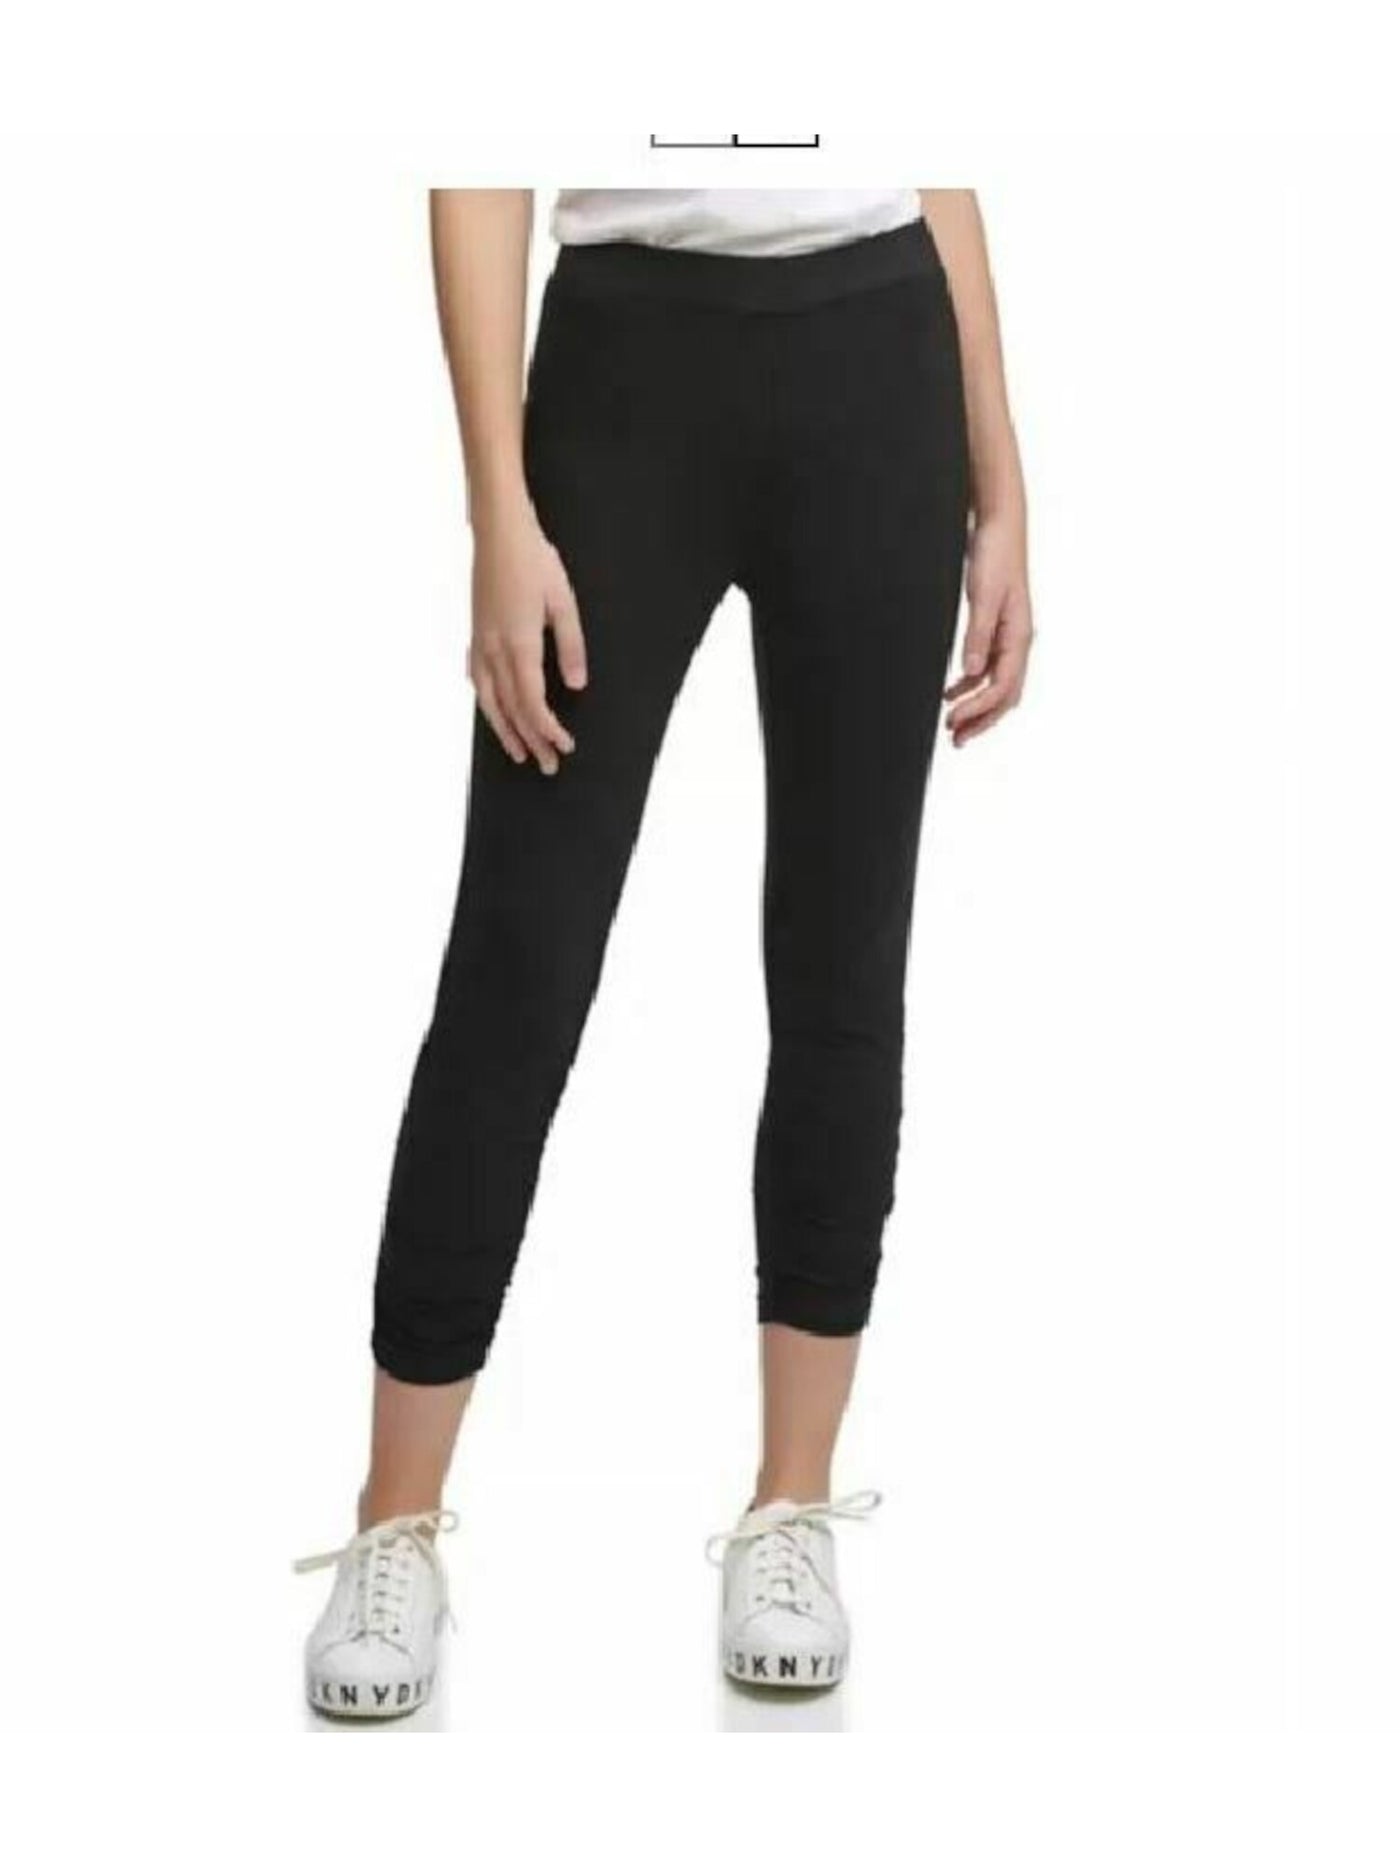 DKNY Womens Black Ruched Cropped Leggings XS